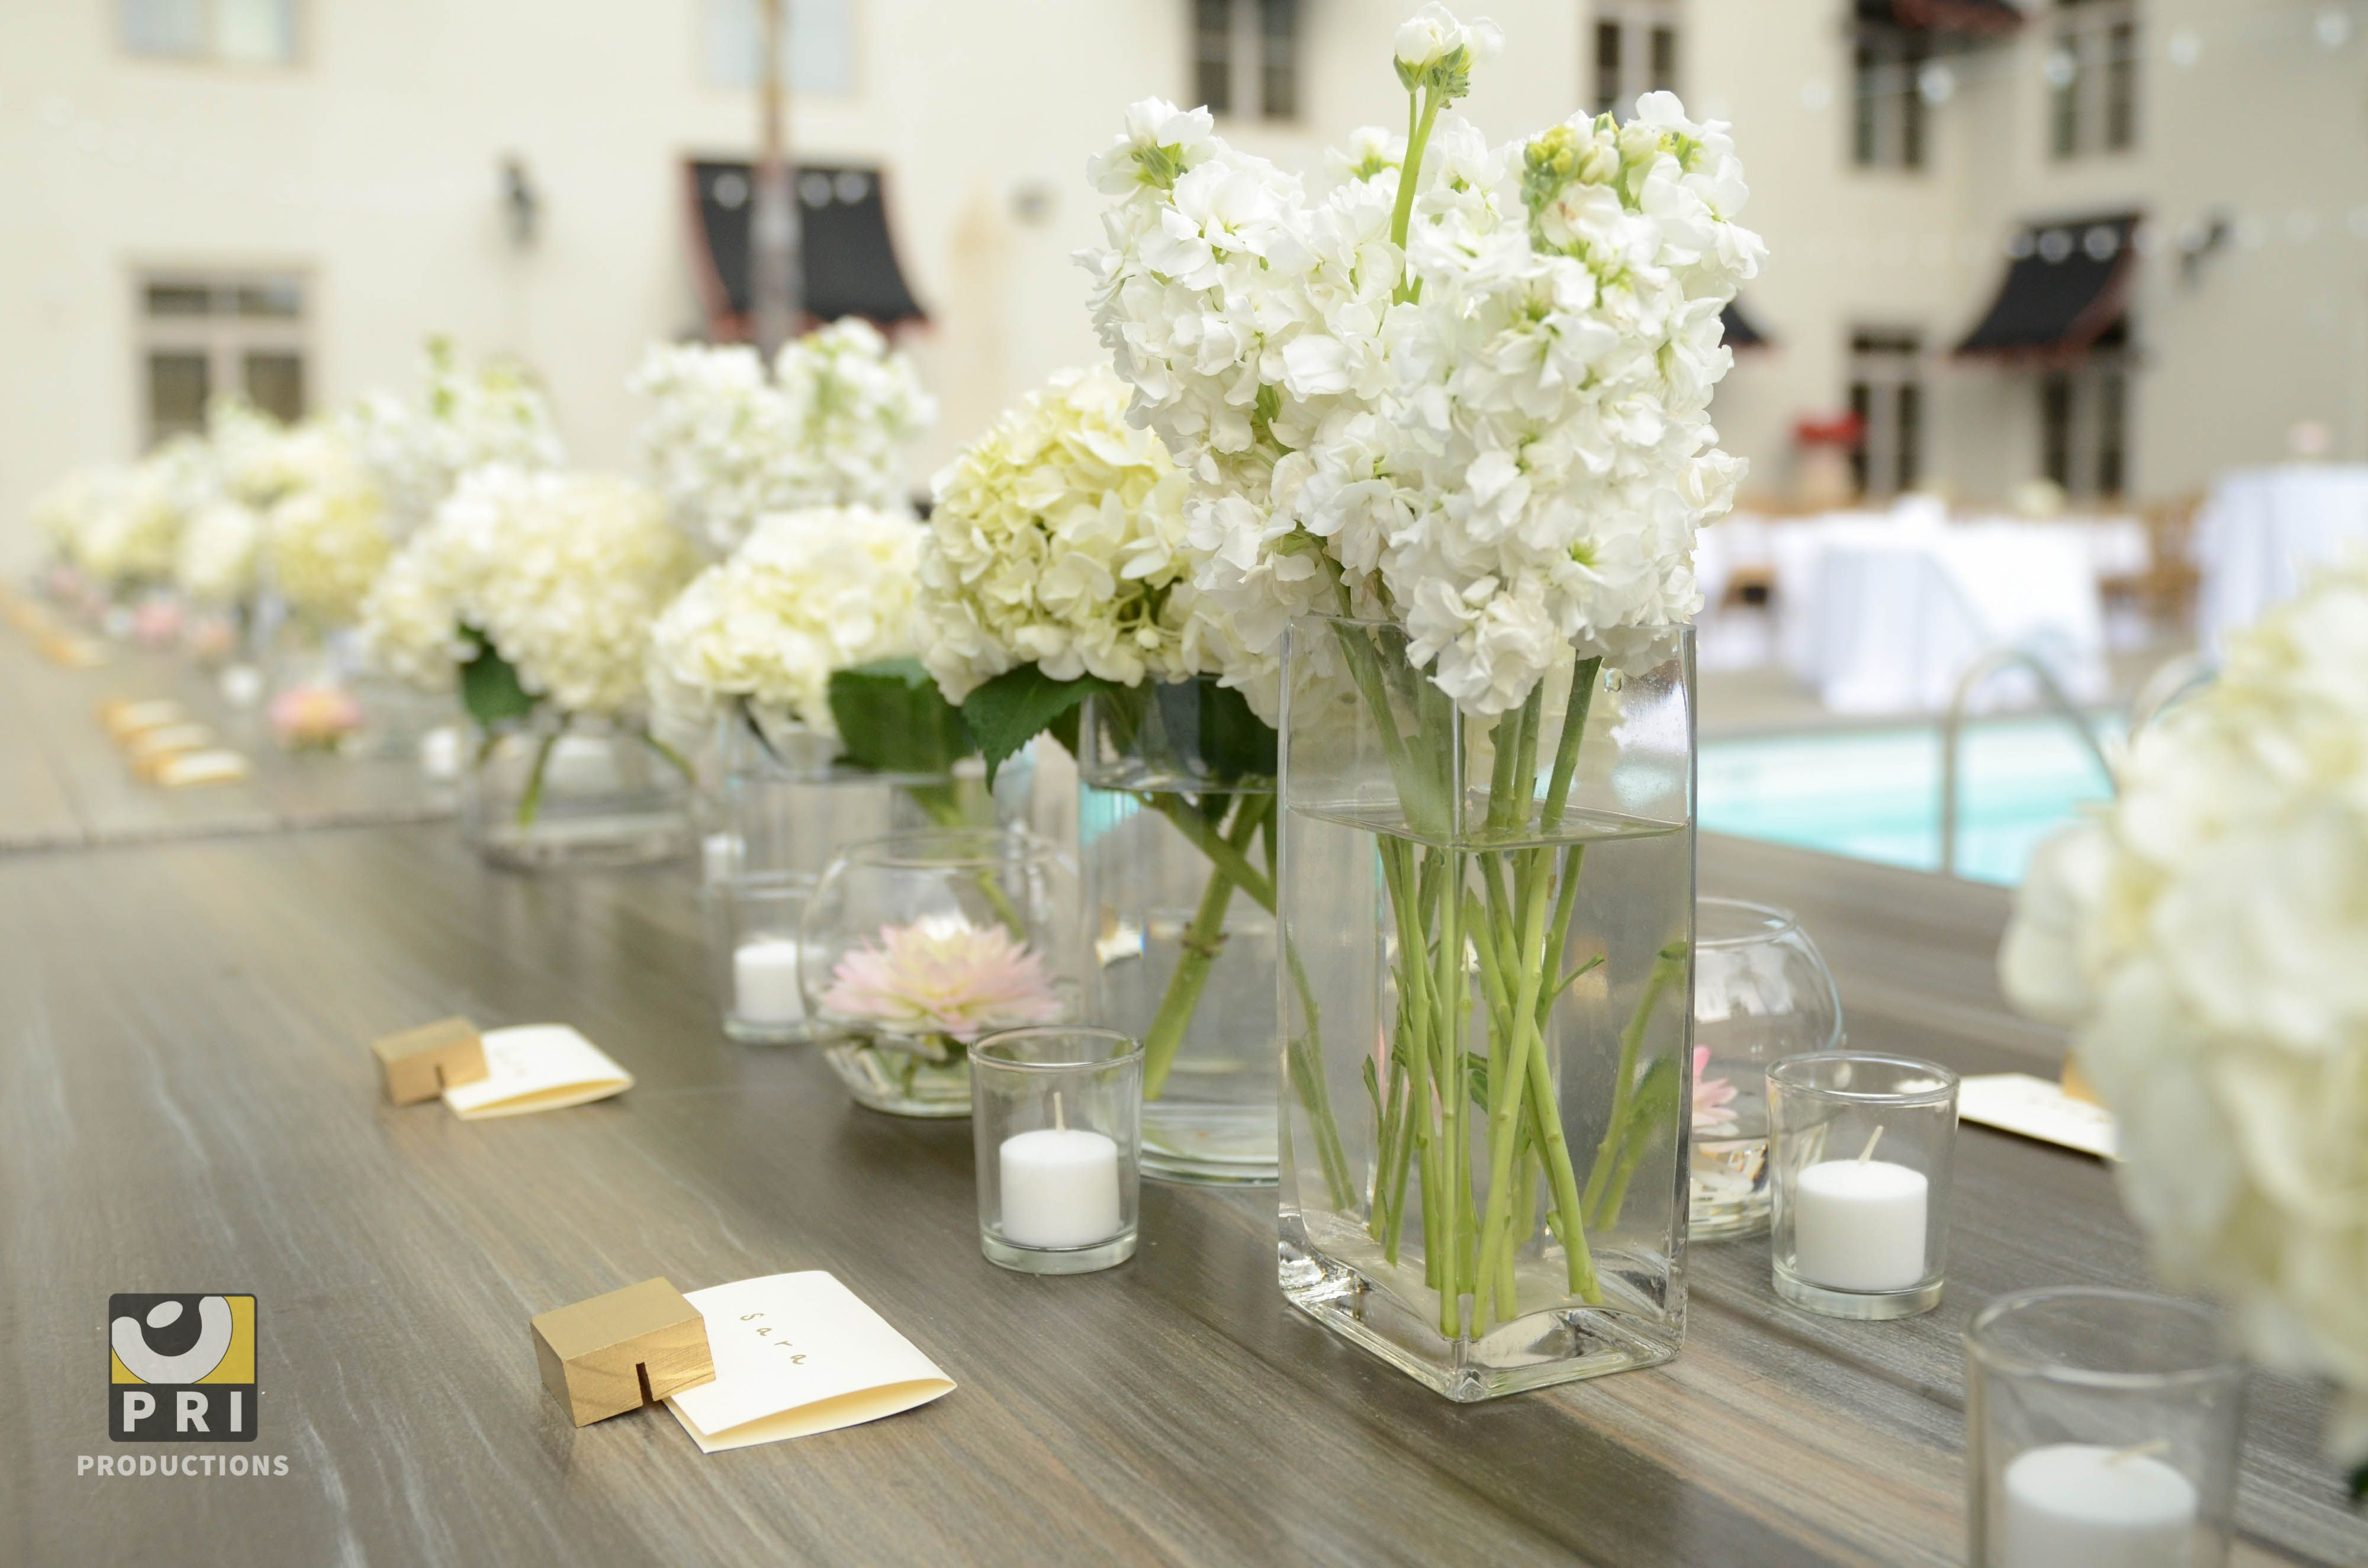 rose gold vase centerpiece of white hydrangeas in rectangle glass vases look elegant on our throughout white hydrangeas in rectangle glass vases look elegant on our driftwood tables pretty pink gold and white wedding color theme